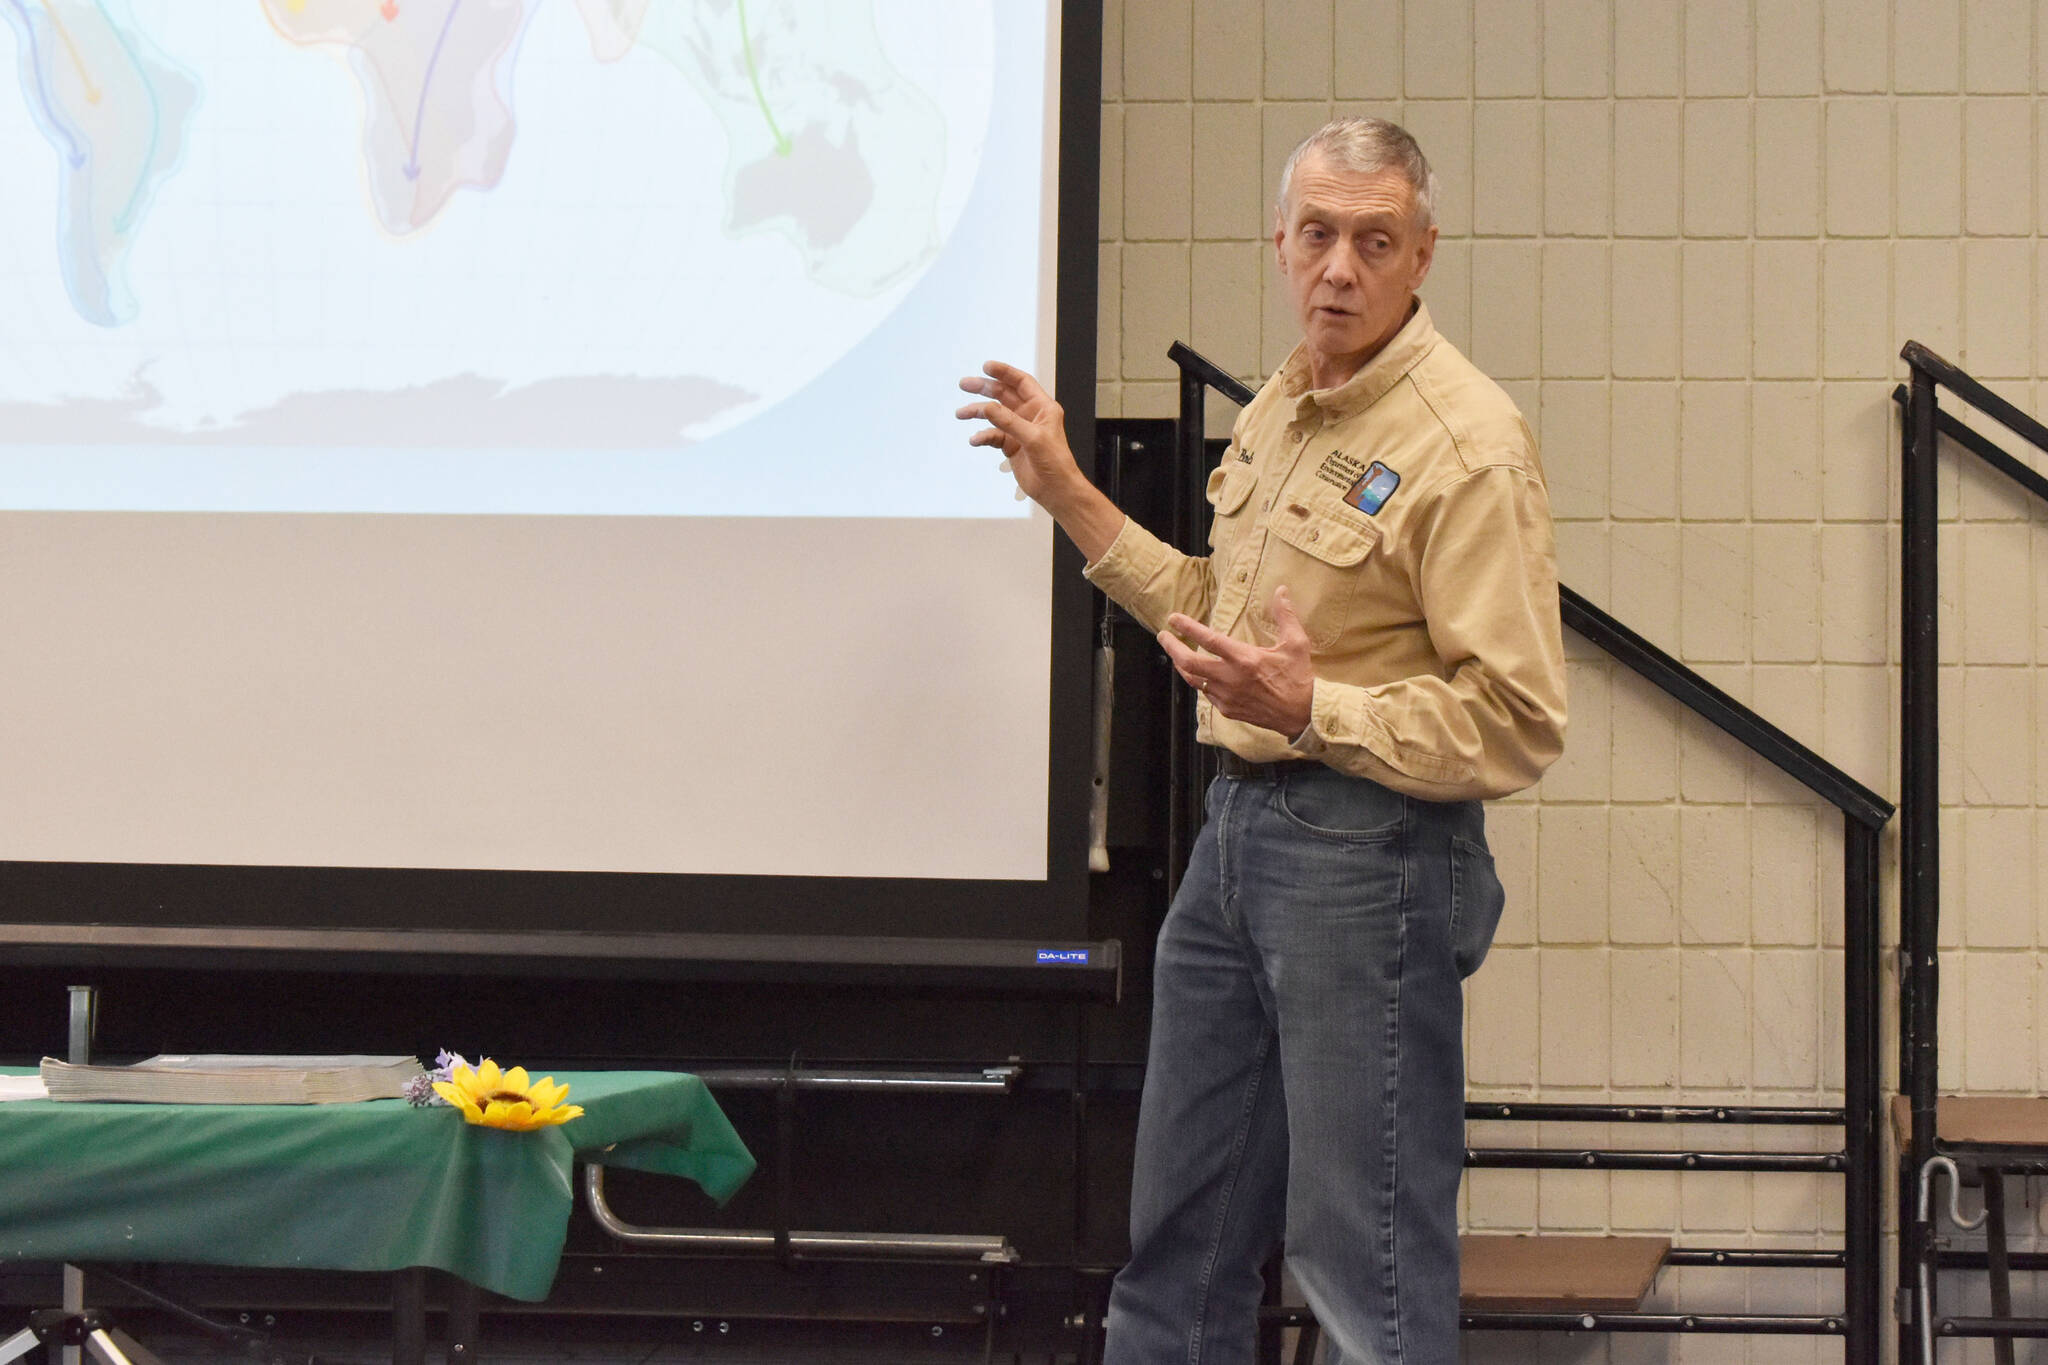 Alaska State Veterinarian Dr. Bob Gerlach gives a presentation on Avian Influenza Virus at the 4-H Agriculture Expo in Soldotna, Alaska, on Aug. 5, 2022. (Jake Dye/Peninsula Clarion)